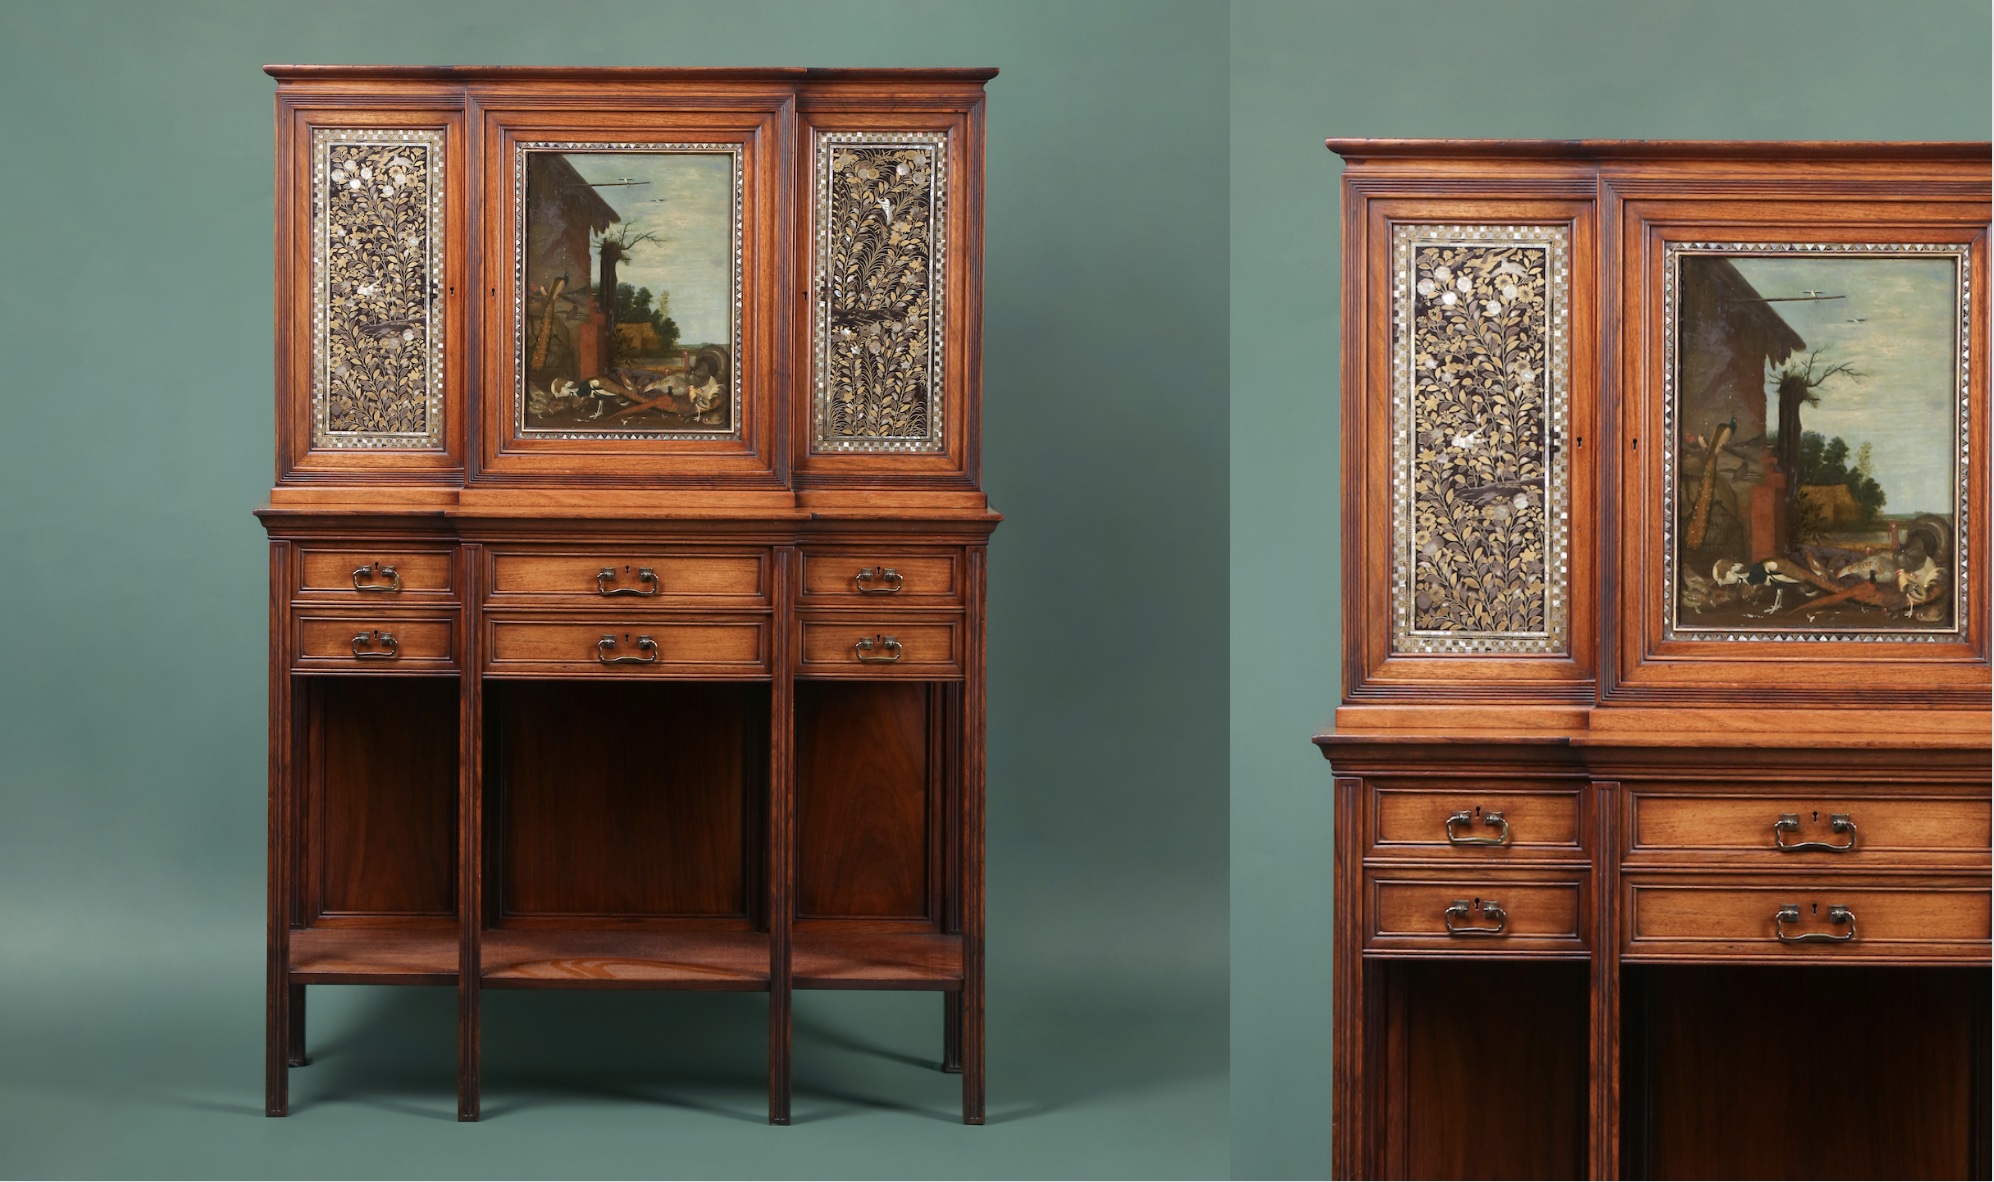 Rare Aesthetic Movement cabinet in sale – Antique Collecting